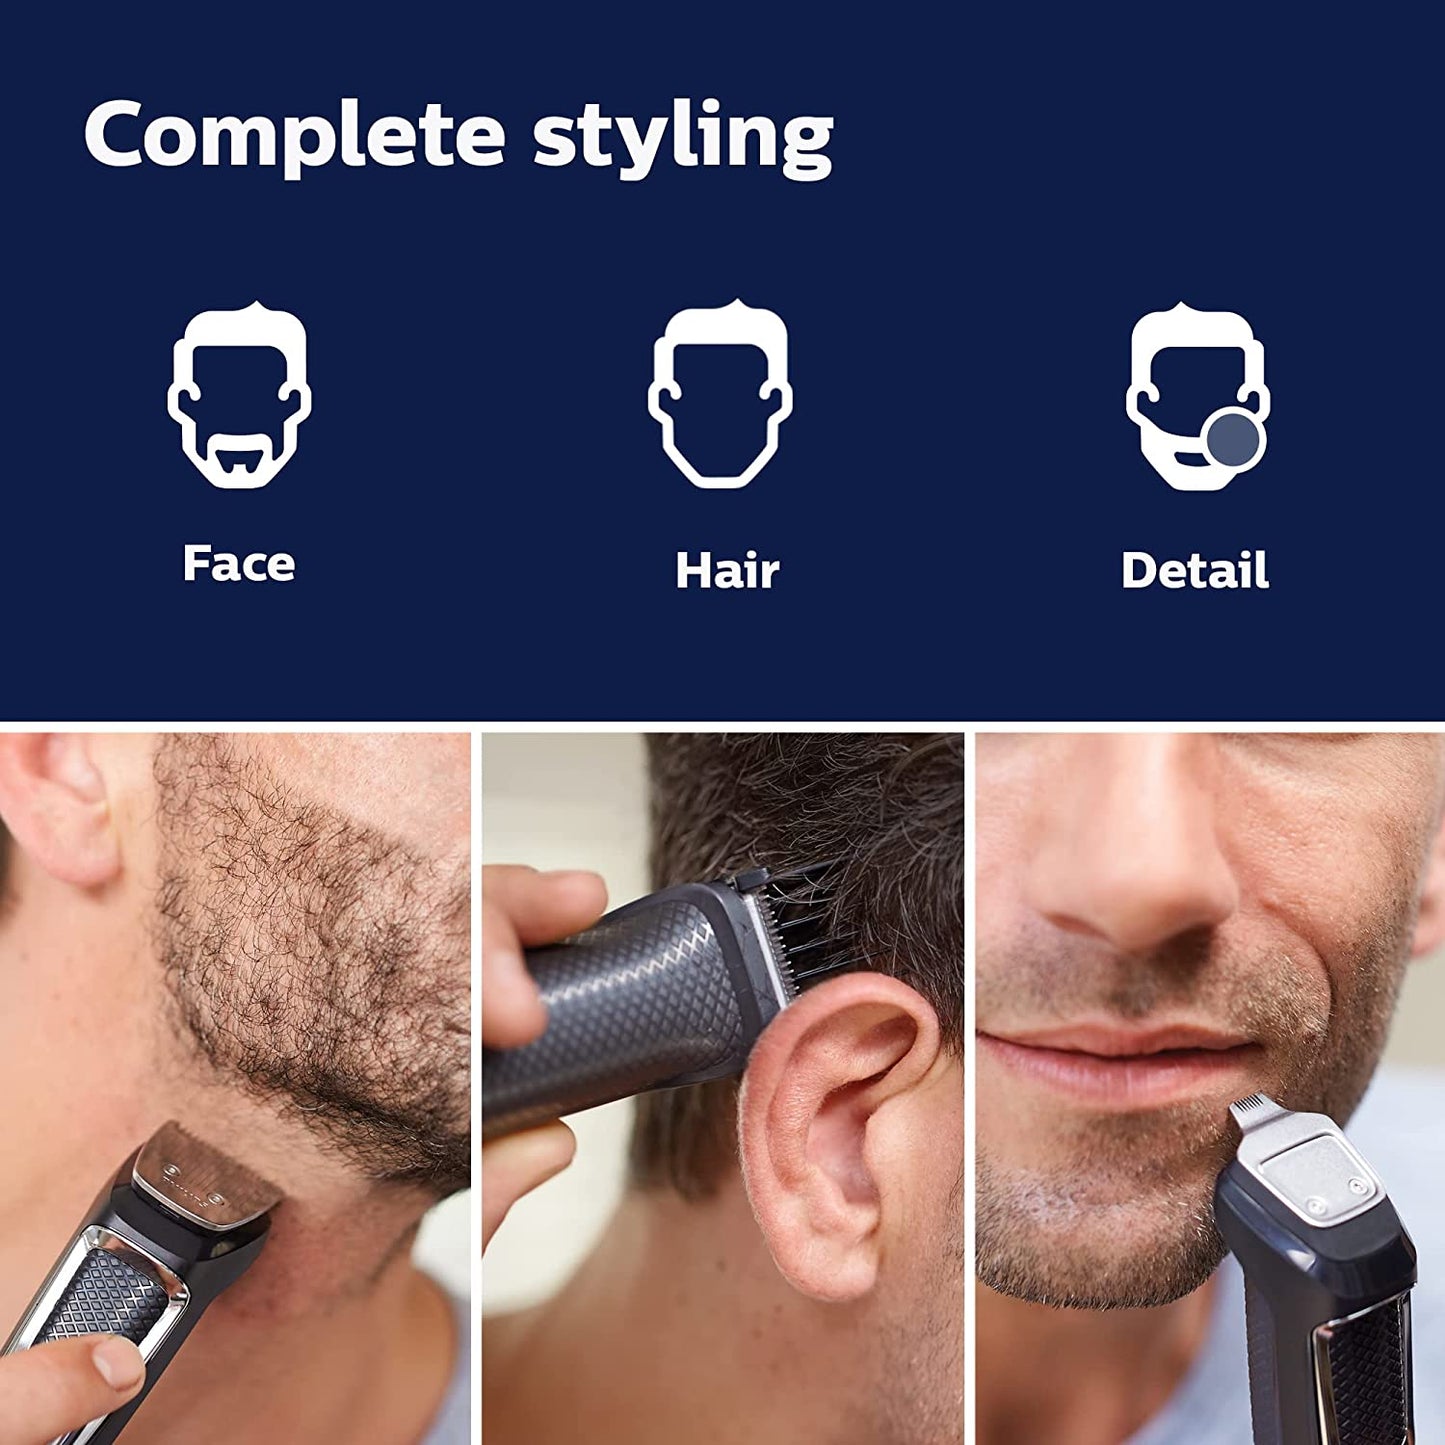 Philips Norelco Multi-groomer All-in-One Trimmer Series 3000, 13 Piece Men's Grooming Kit ll MG3750/60